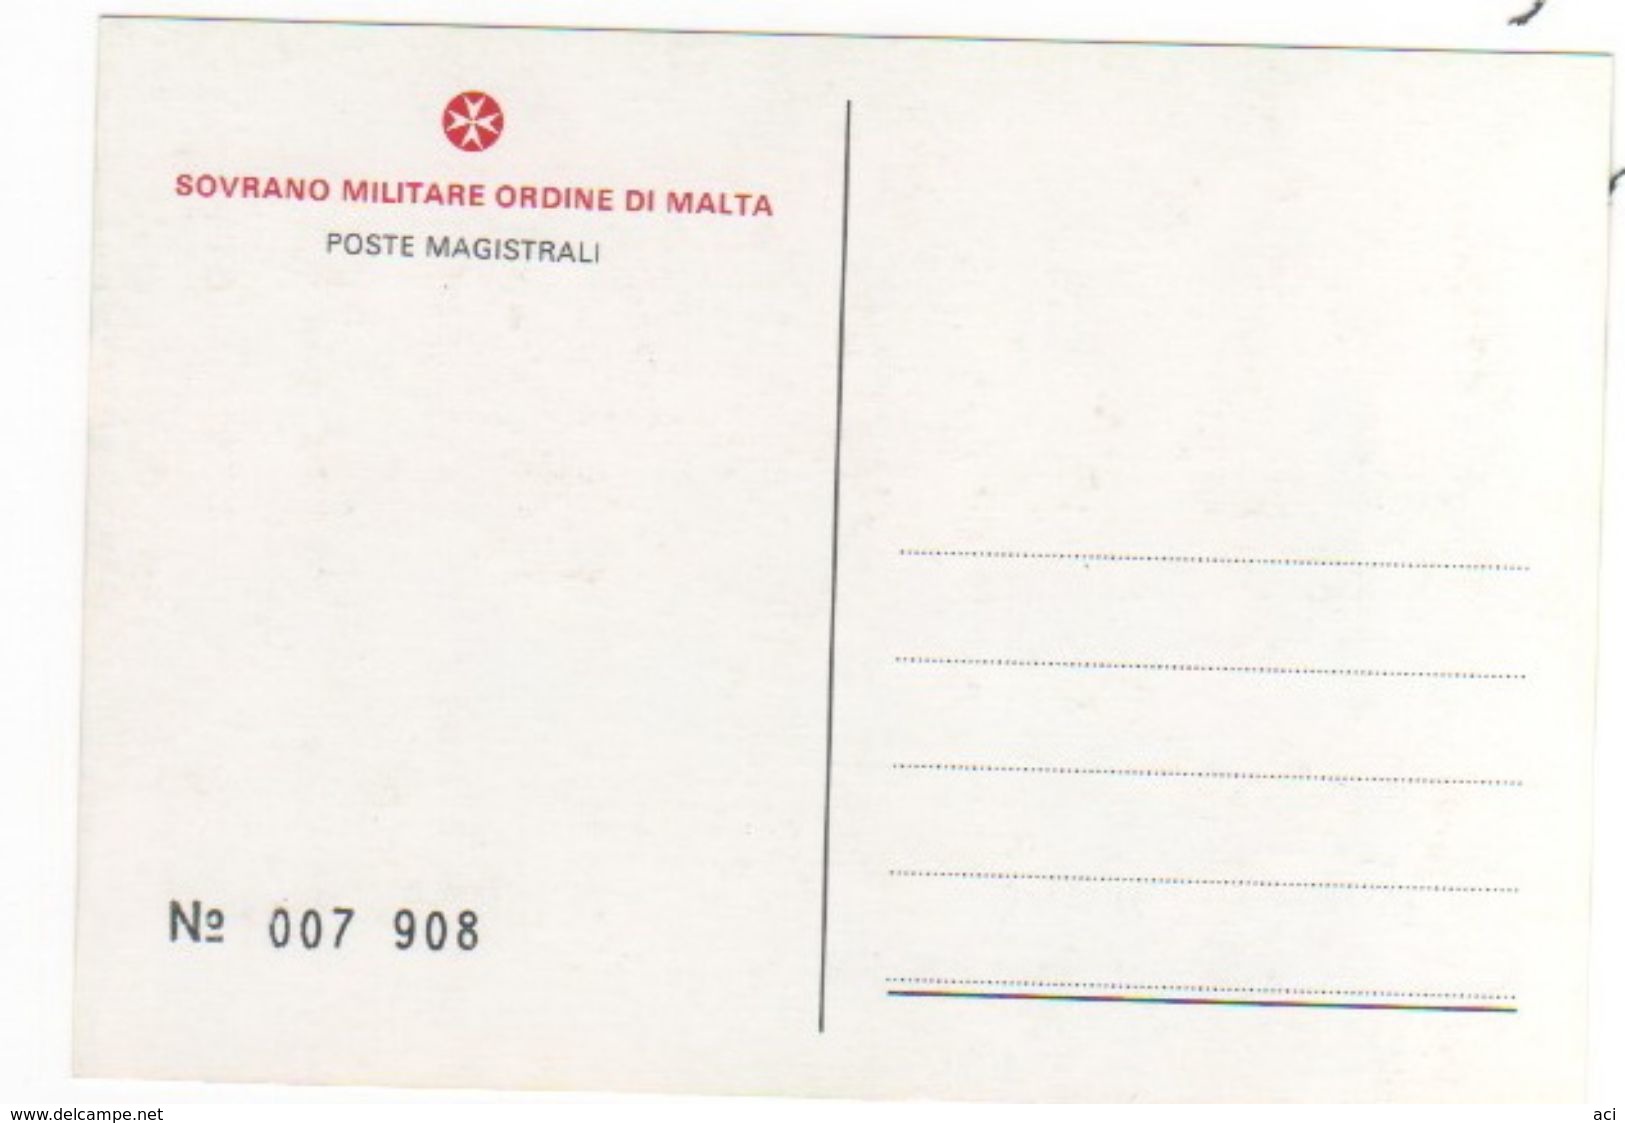 Sovrano Military Order Of Malta 1981 Disabled Year Mint Postal Card - Malte (Ordre De)